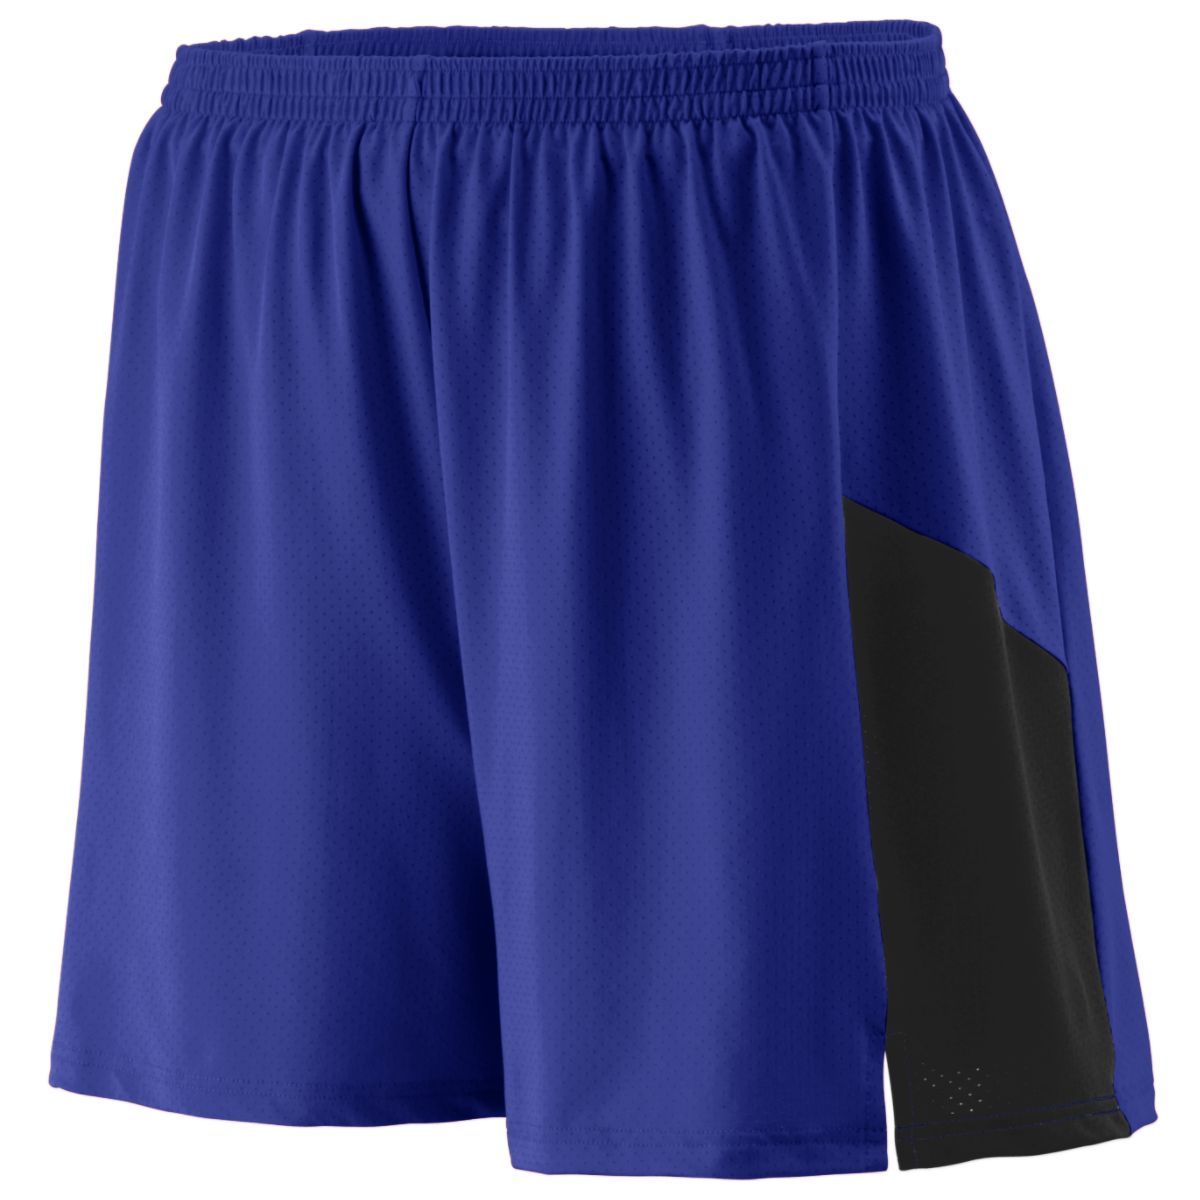 Augusta Sportswear Sprint Shorts in Purple/Black  -Part of the Adult, Adult-Shorts, Augusta-Products, Track-Field product lines at KanaleyCreations.com